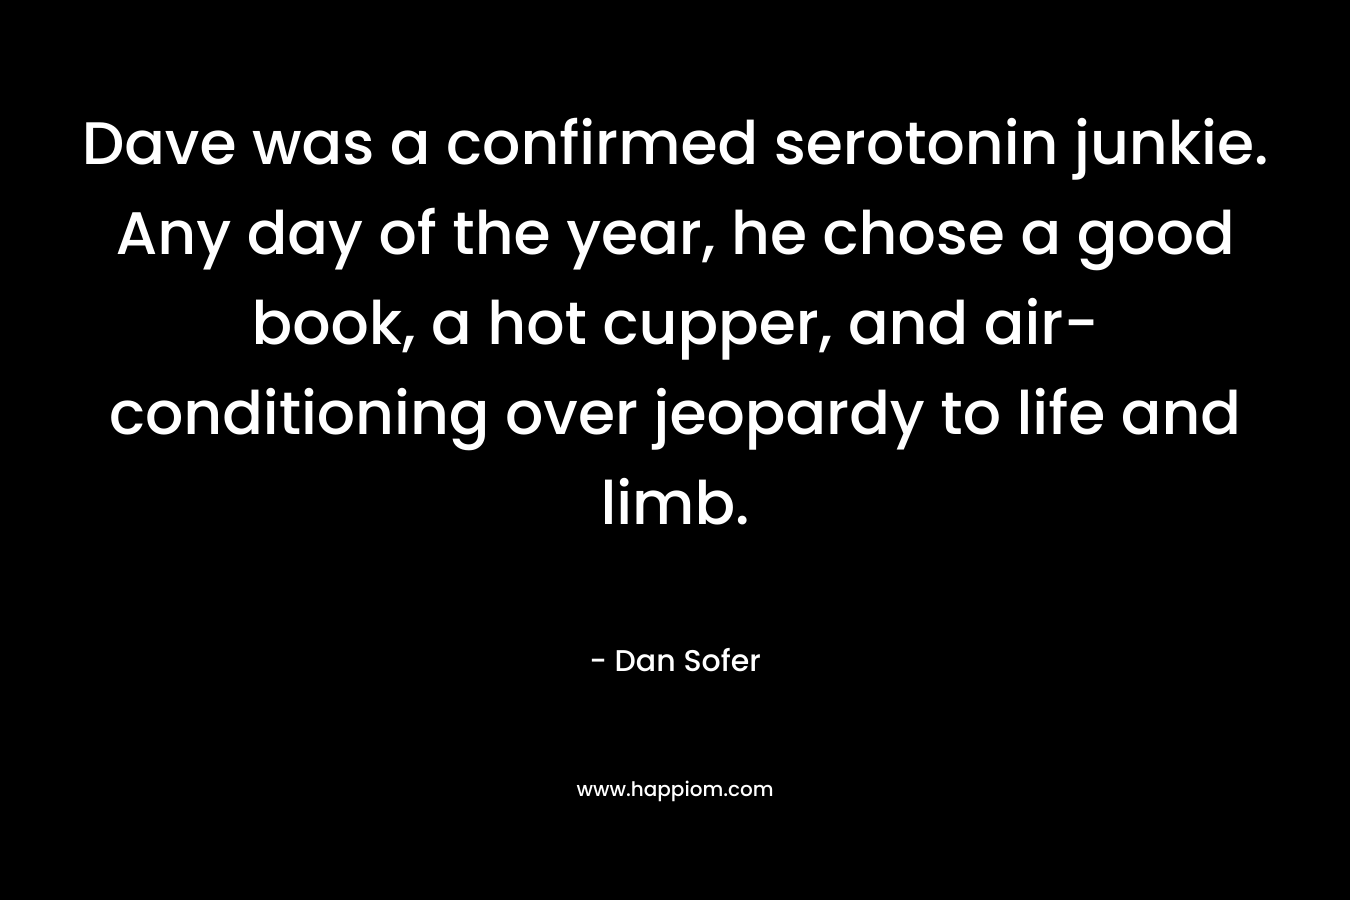 Dave was a confirmed serotonin junkie. Any day of the year, he chose a good book, a hot cupper, and air-conditioning over jeopardy to life and limb.